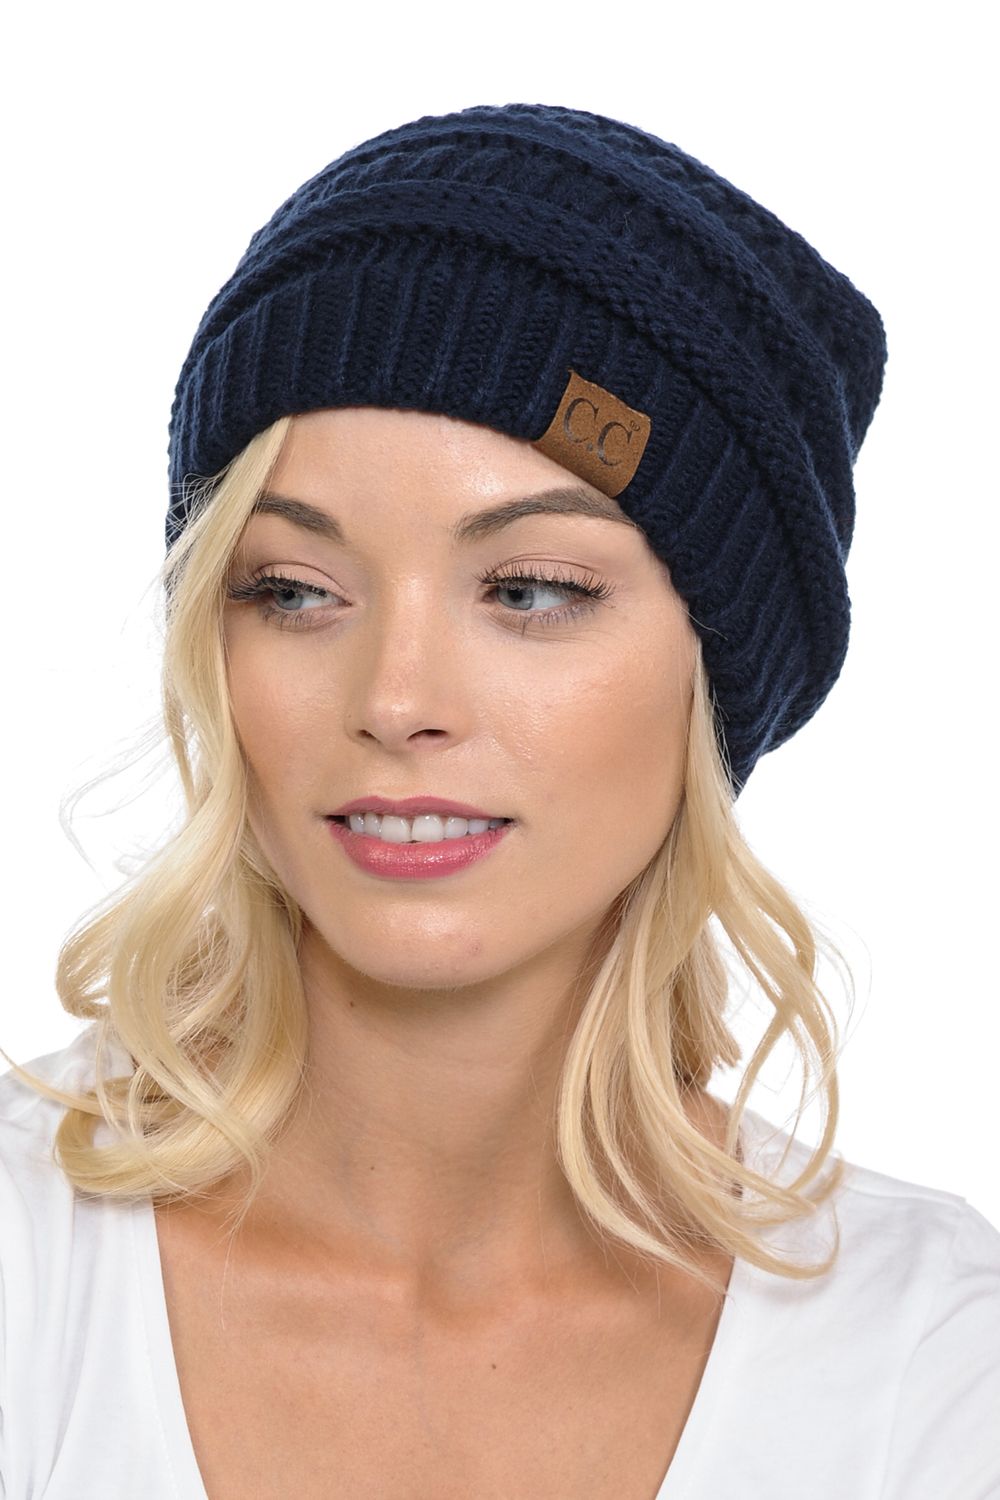 C.C Hat-20A Slouchy Thick Warm Cap Hat Skully Color Cable Knit Beanie Navy - image 2 of 2